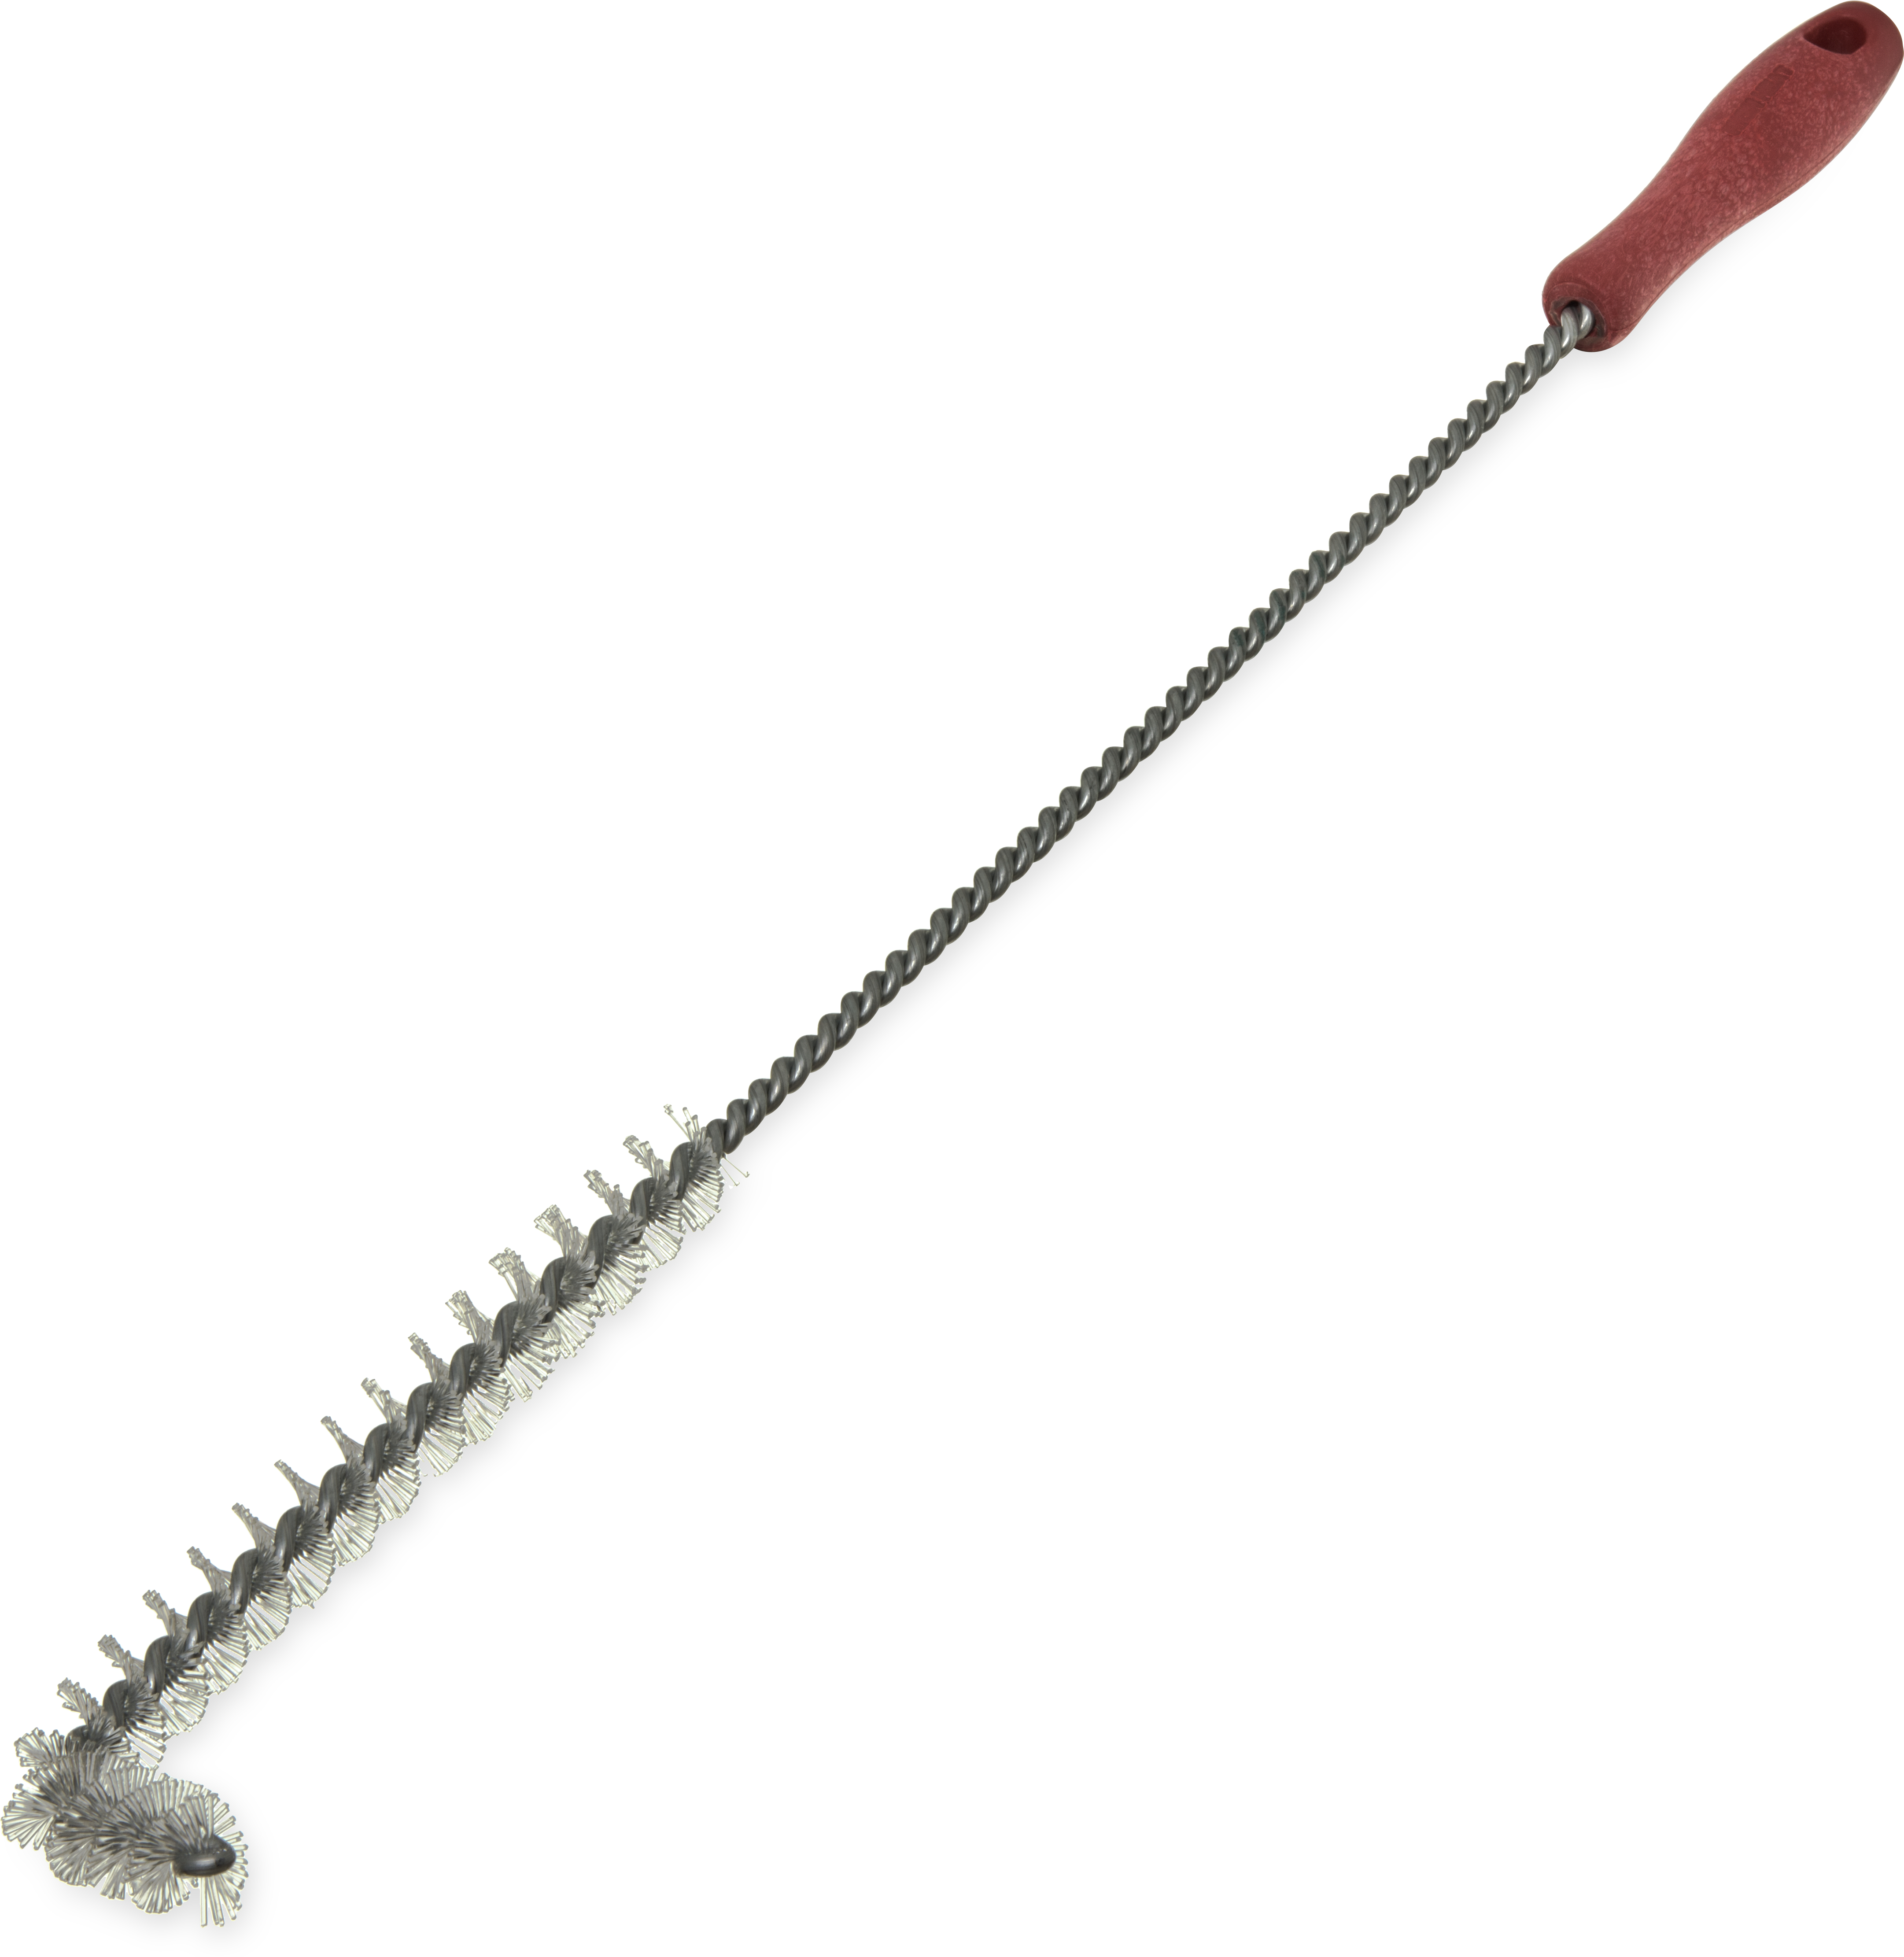 L-Tipped High Heat Fryer Brush 23 - Red